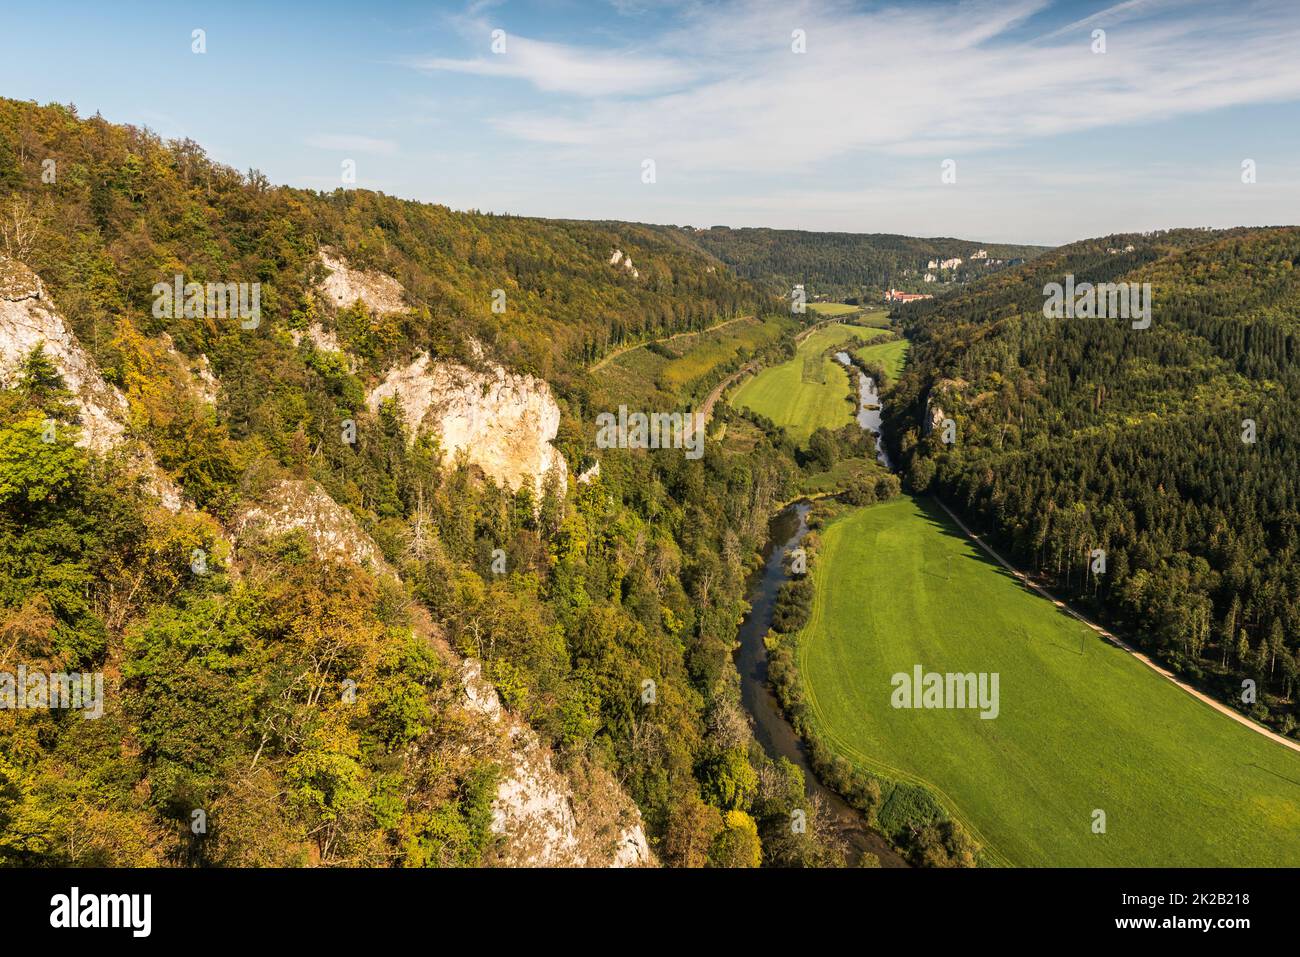 View from the Knopfmacherfelsen lookout into the Danube Valley Stock Photo